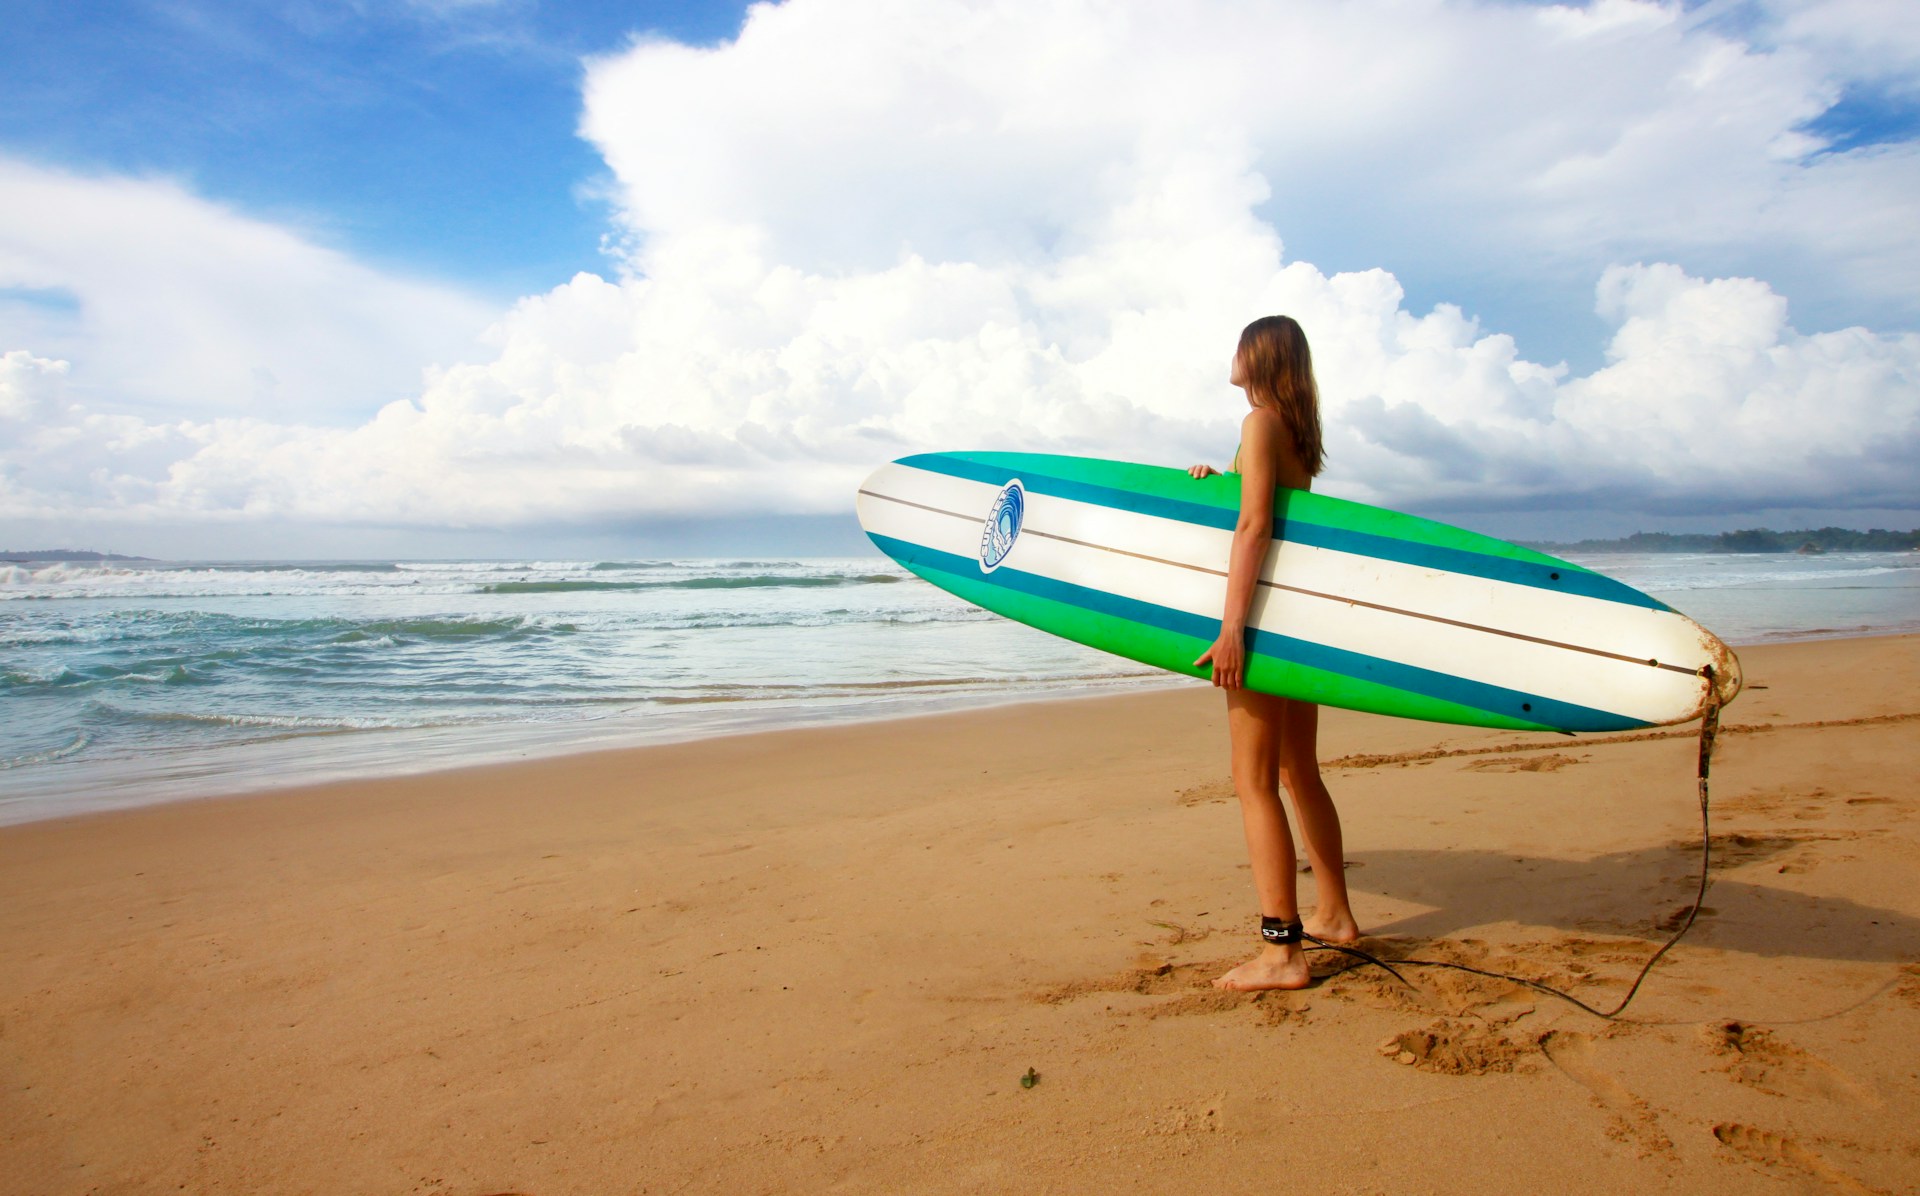 photo - a woman holding a surfboard while standing on the beach and looking towards the ocean